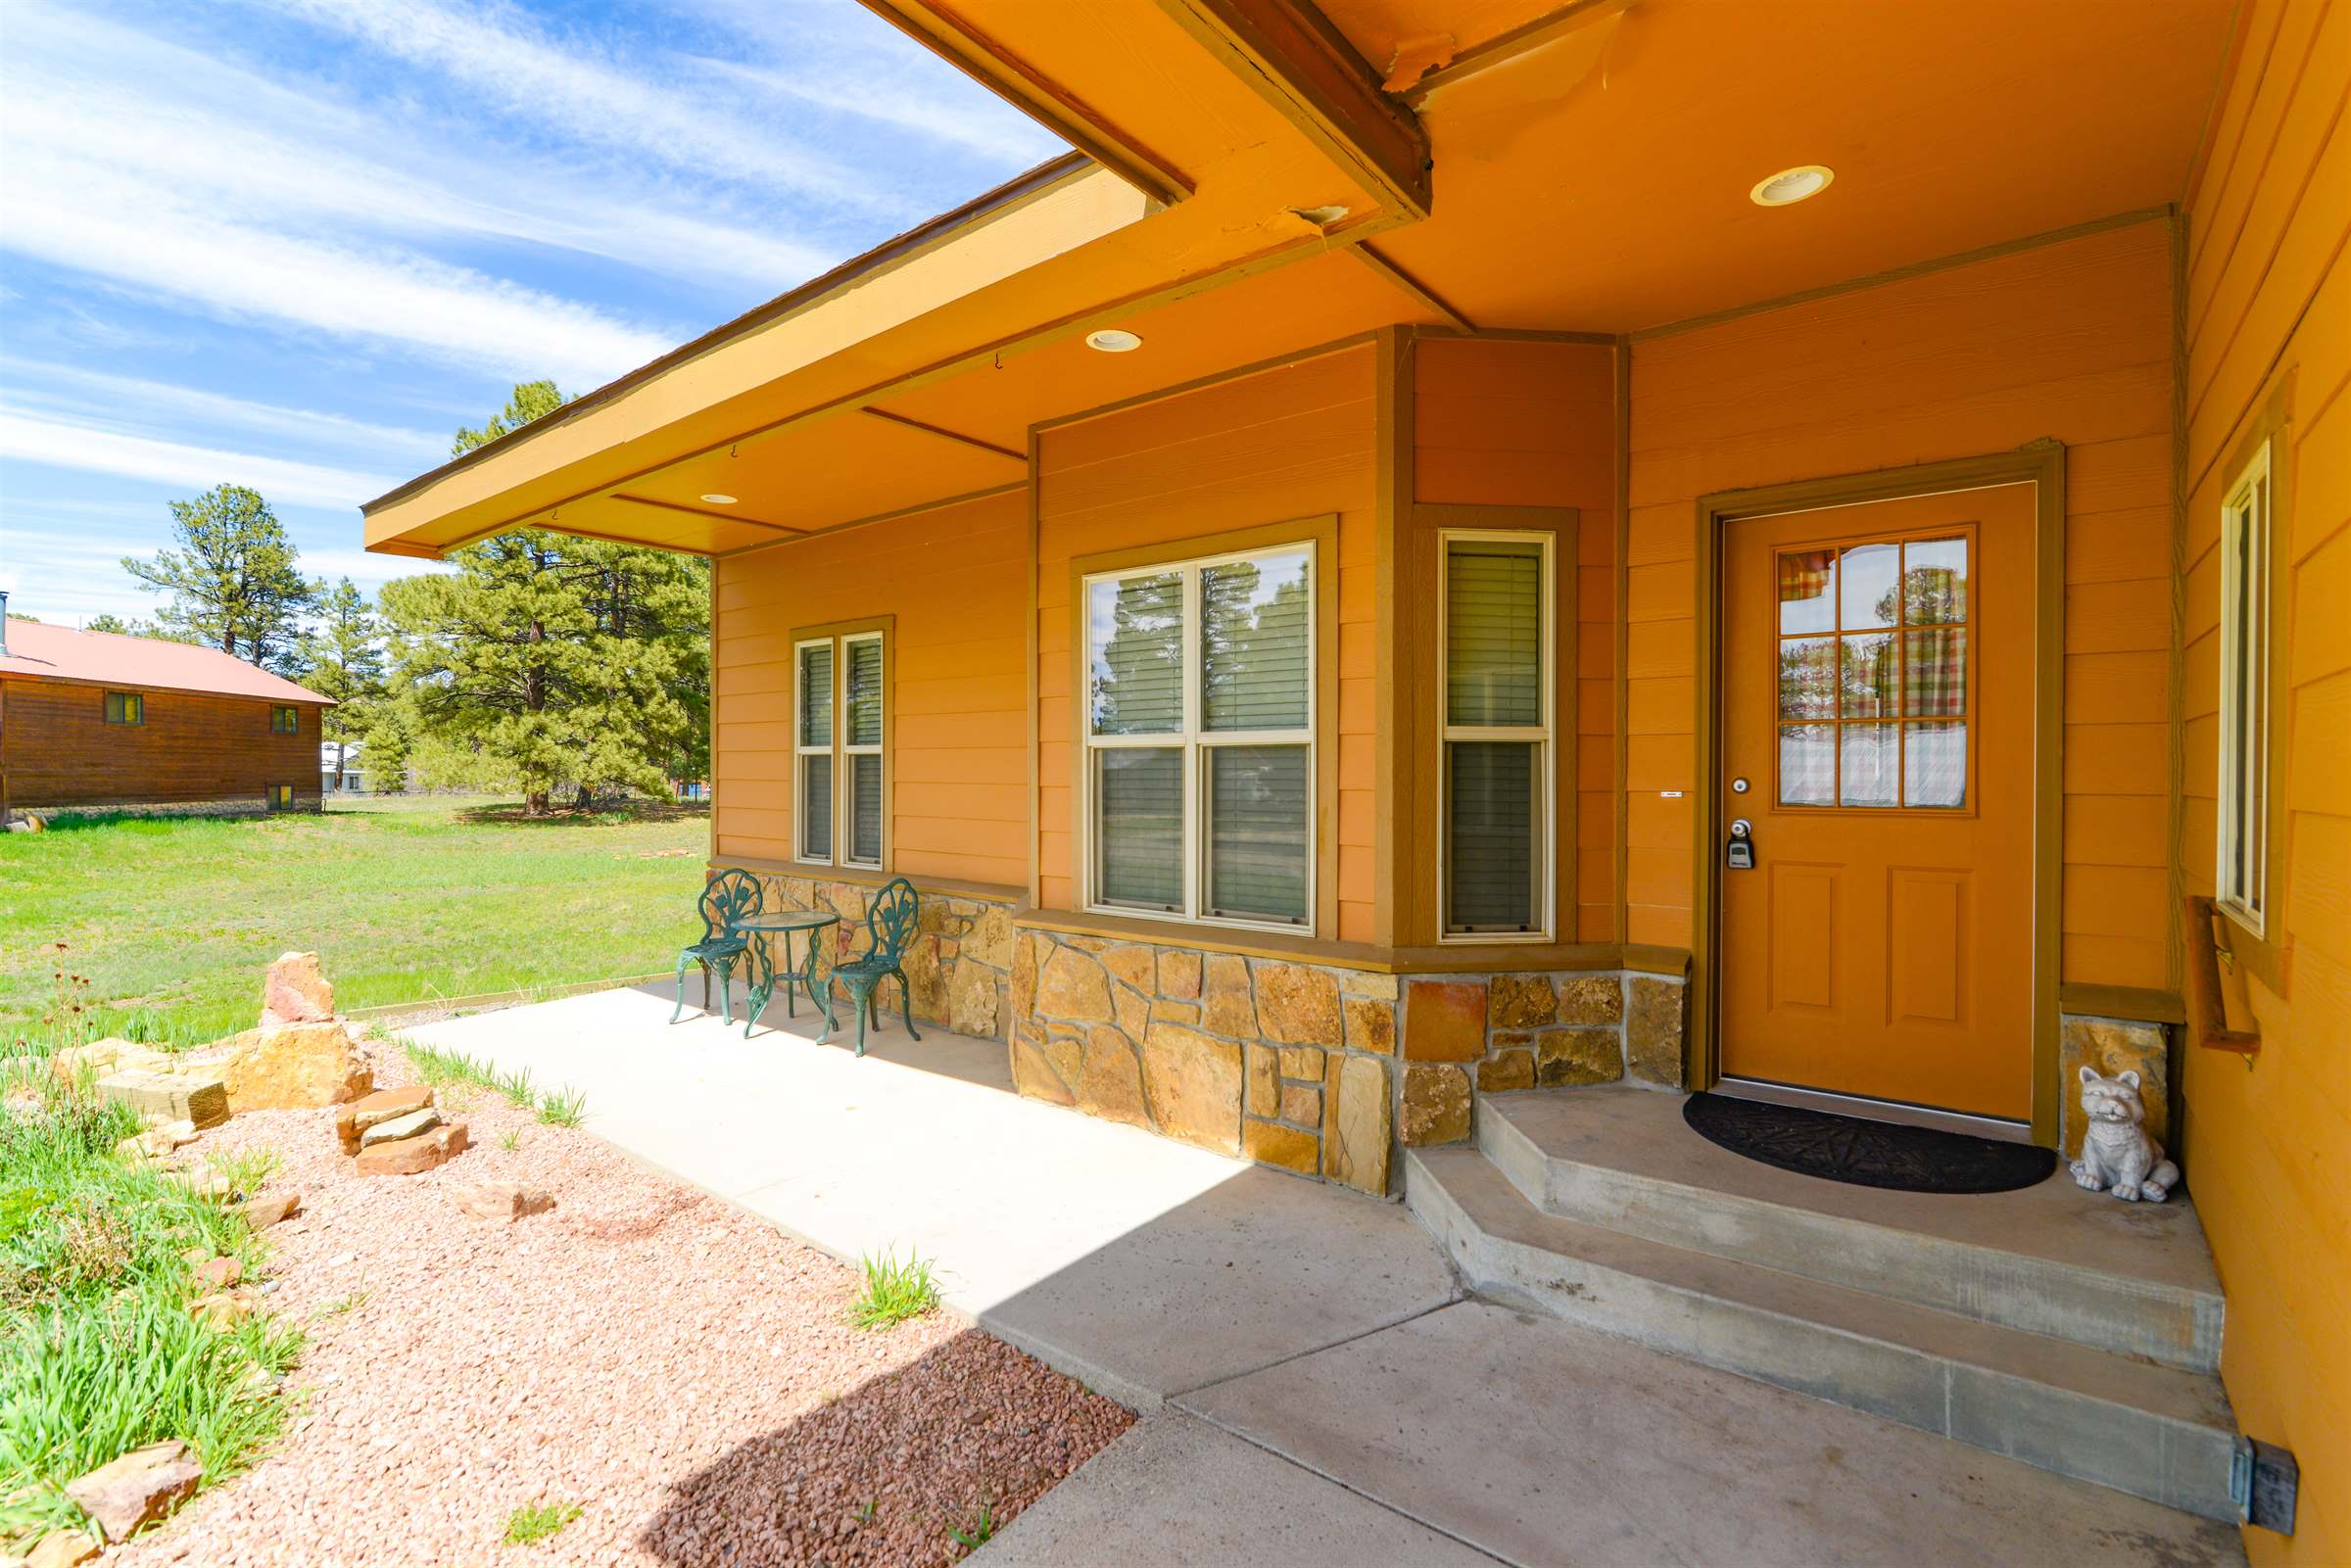 Chipper's Abode, #35 Chipper Ct - ST, Pagosa Springs, CO 81147